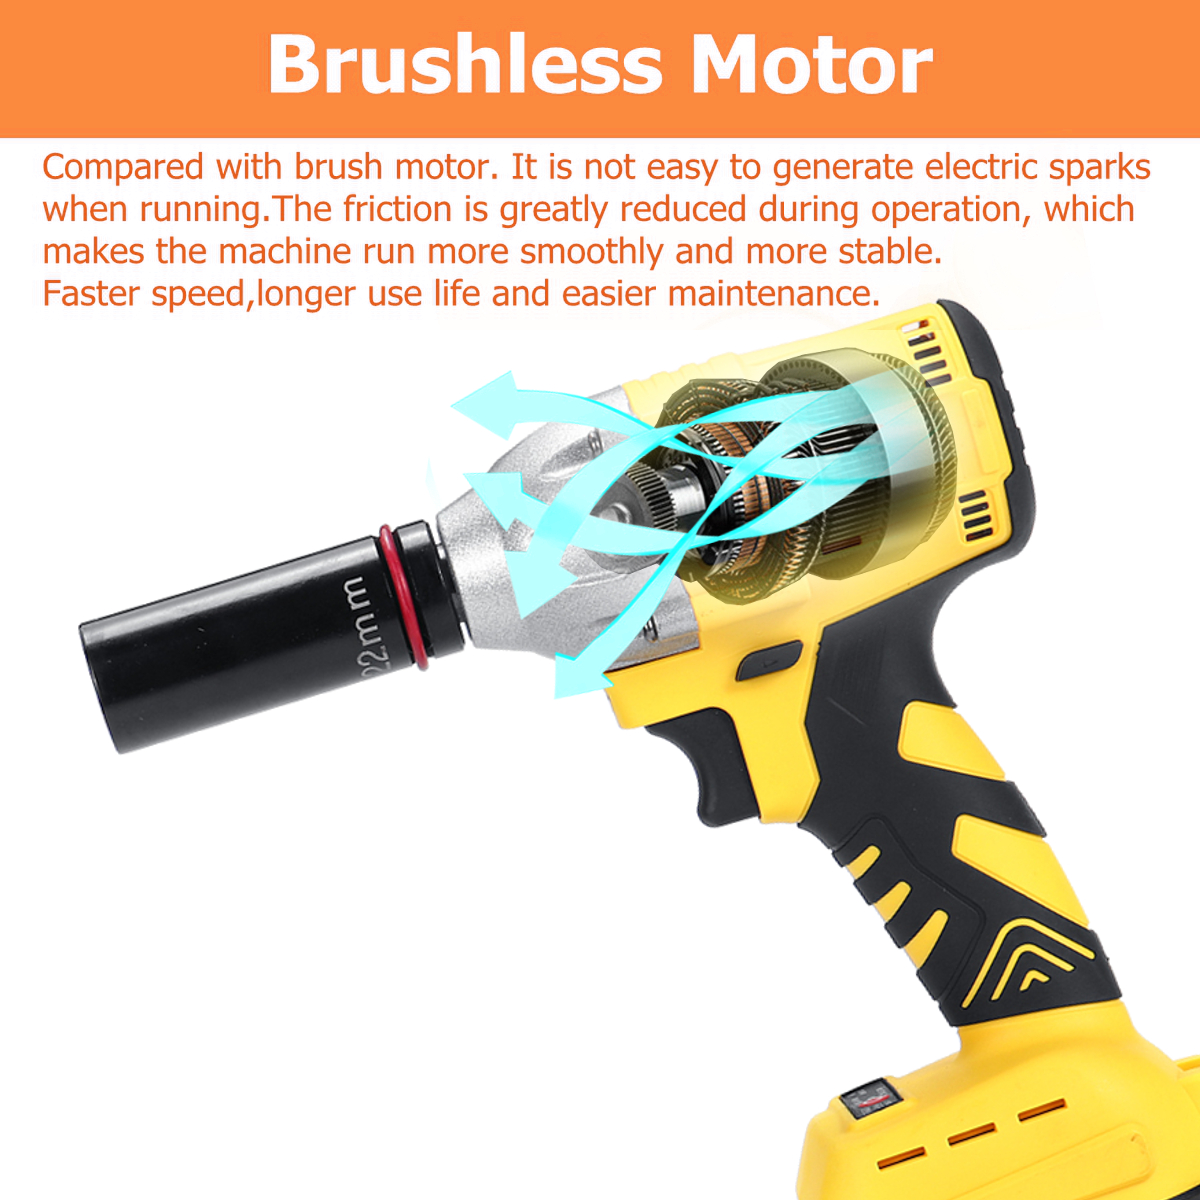 158VF-19800mAh-Cordless-Brushless-Impact-Wrench-Power-Driver-Electric-Wrench-Socket-Battery-Hand-Dri-1545779-7